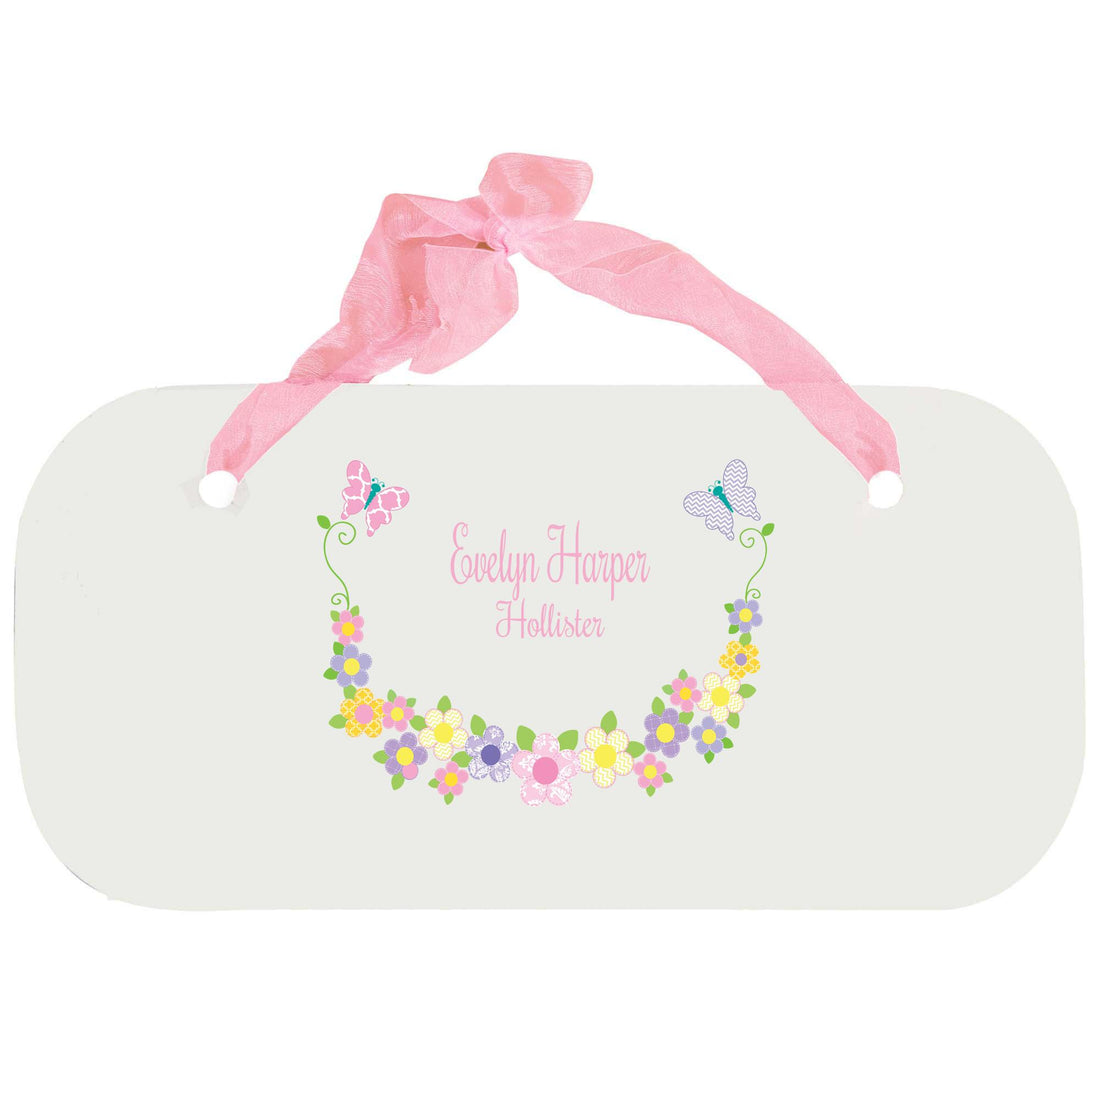 Personalized Girls Wall Plaque with Pastel Butterflies design